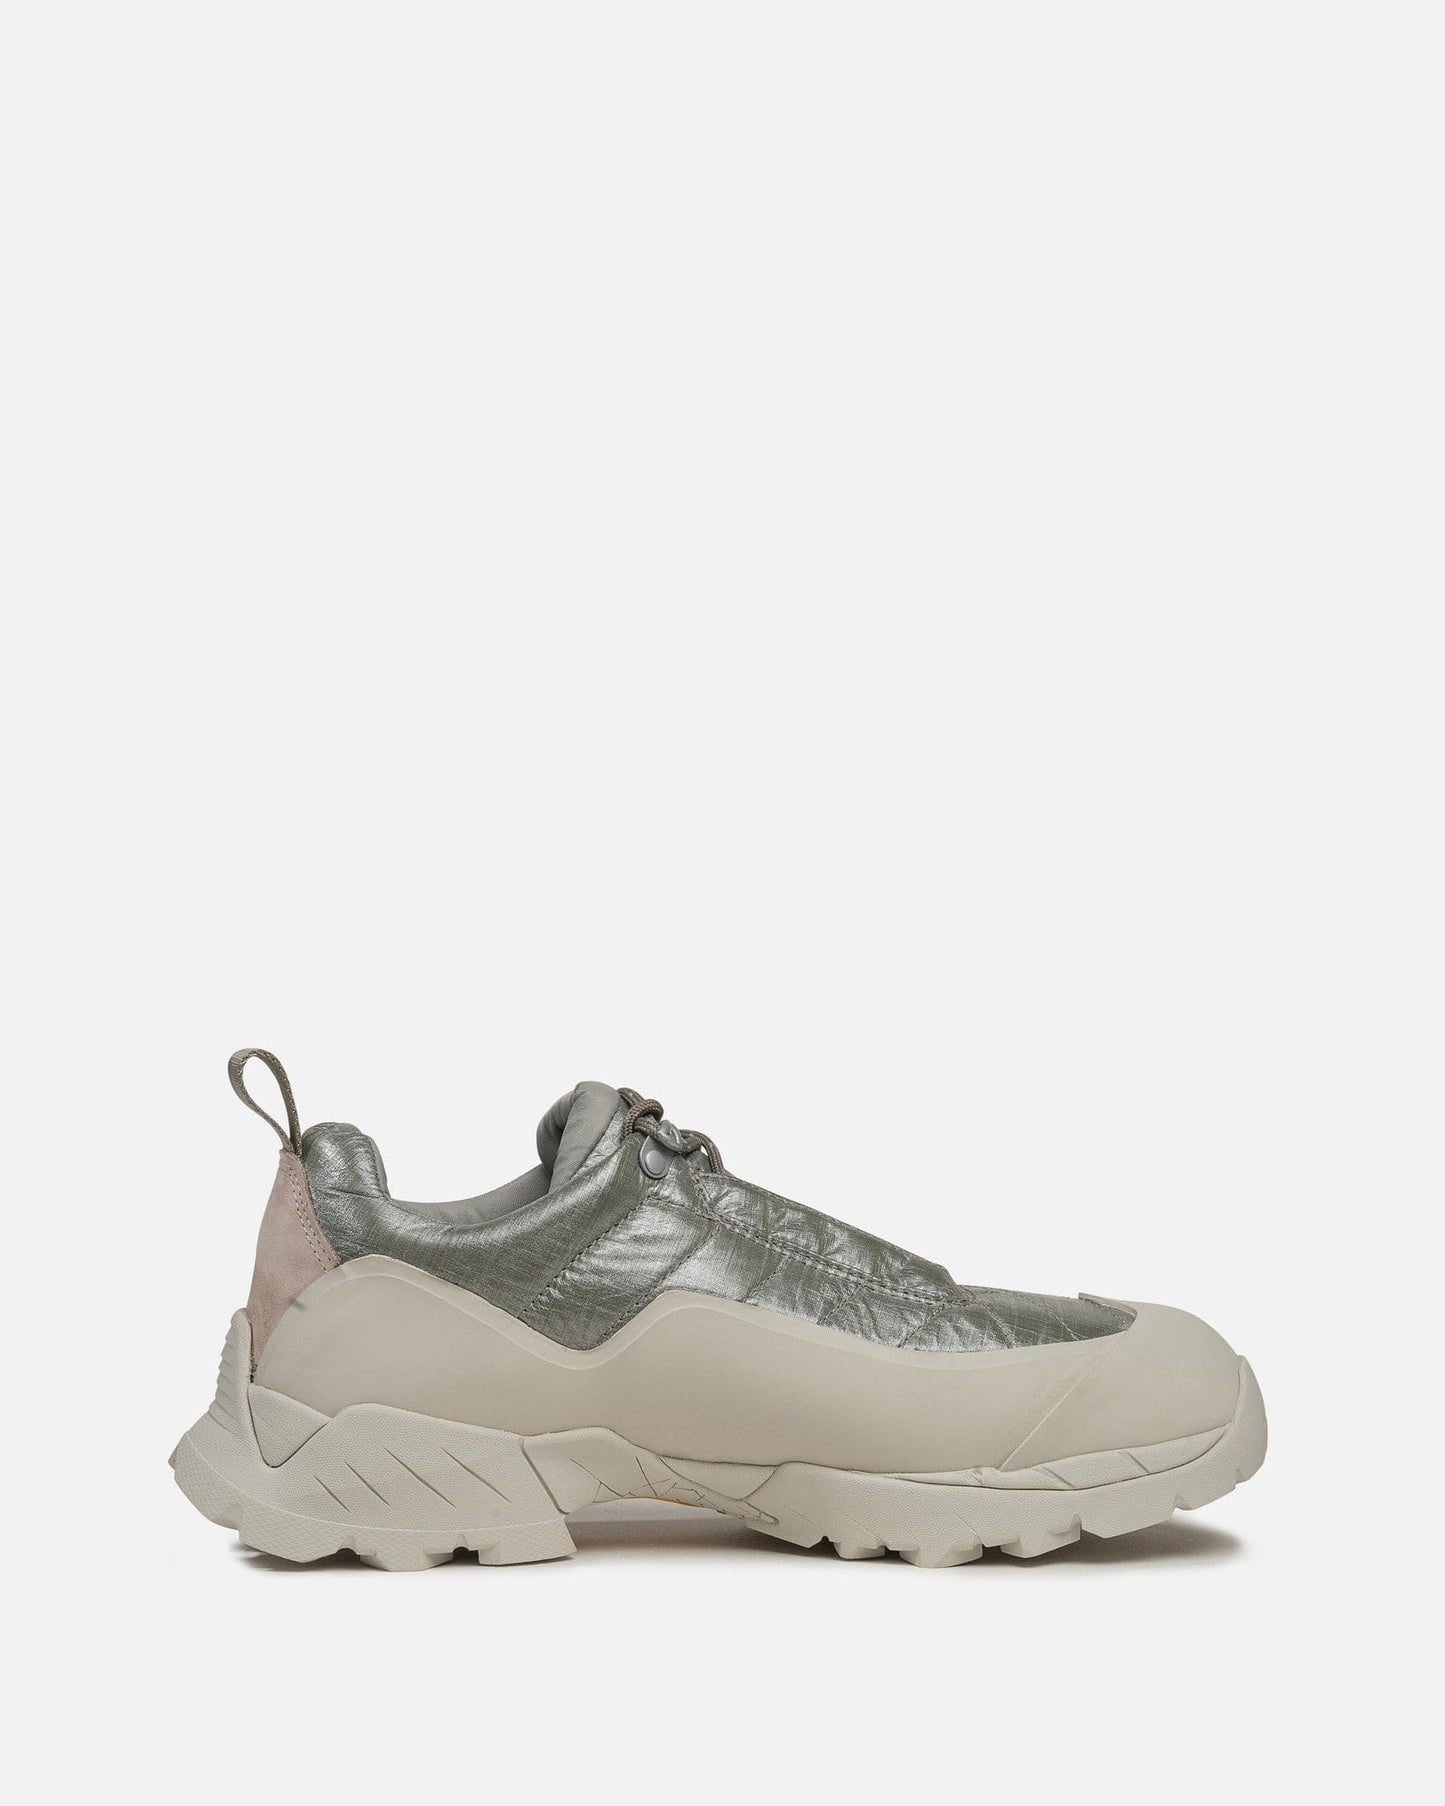 Roa Men's Sneakers KATHARINA in Silver Taupe